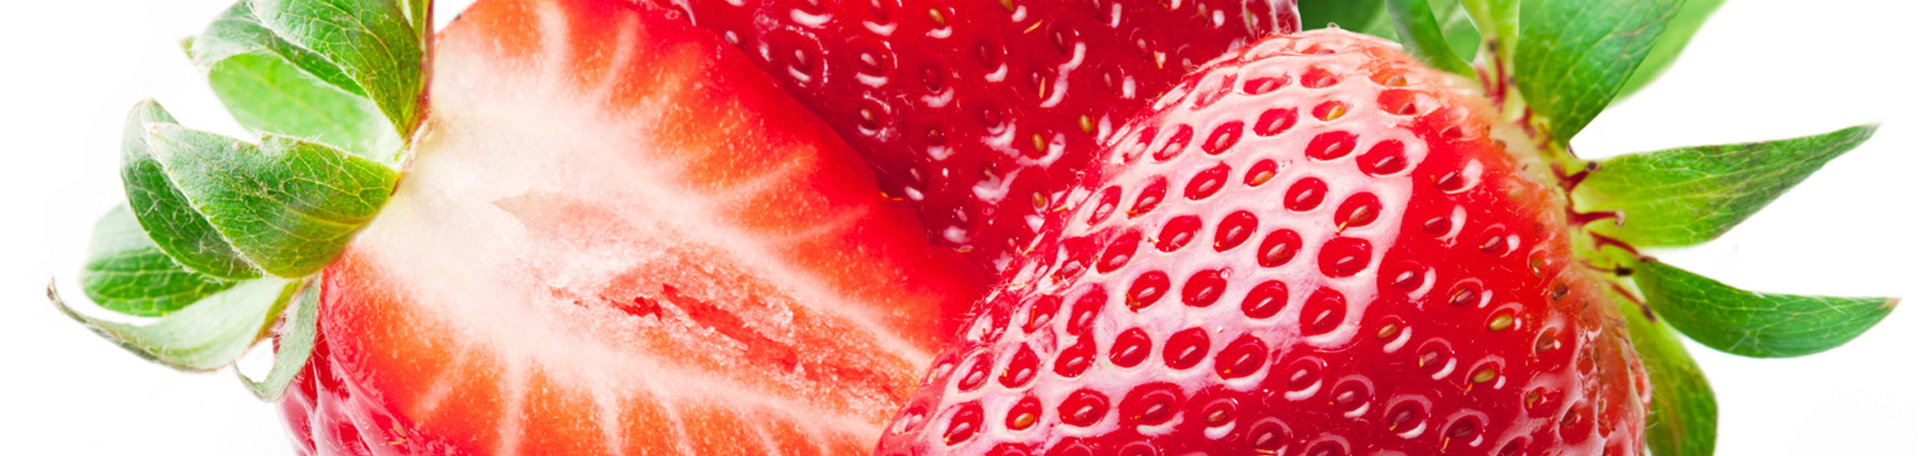 Richmond chiropractic nutrition tip of the month: enjoy strawberries!